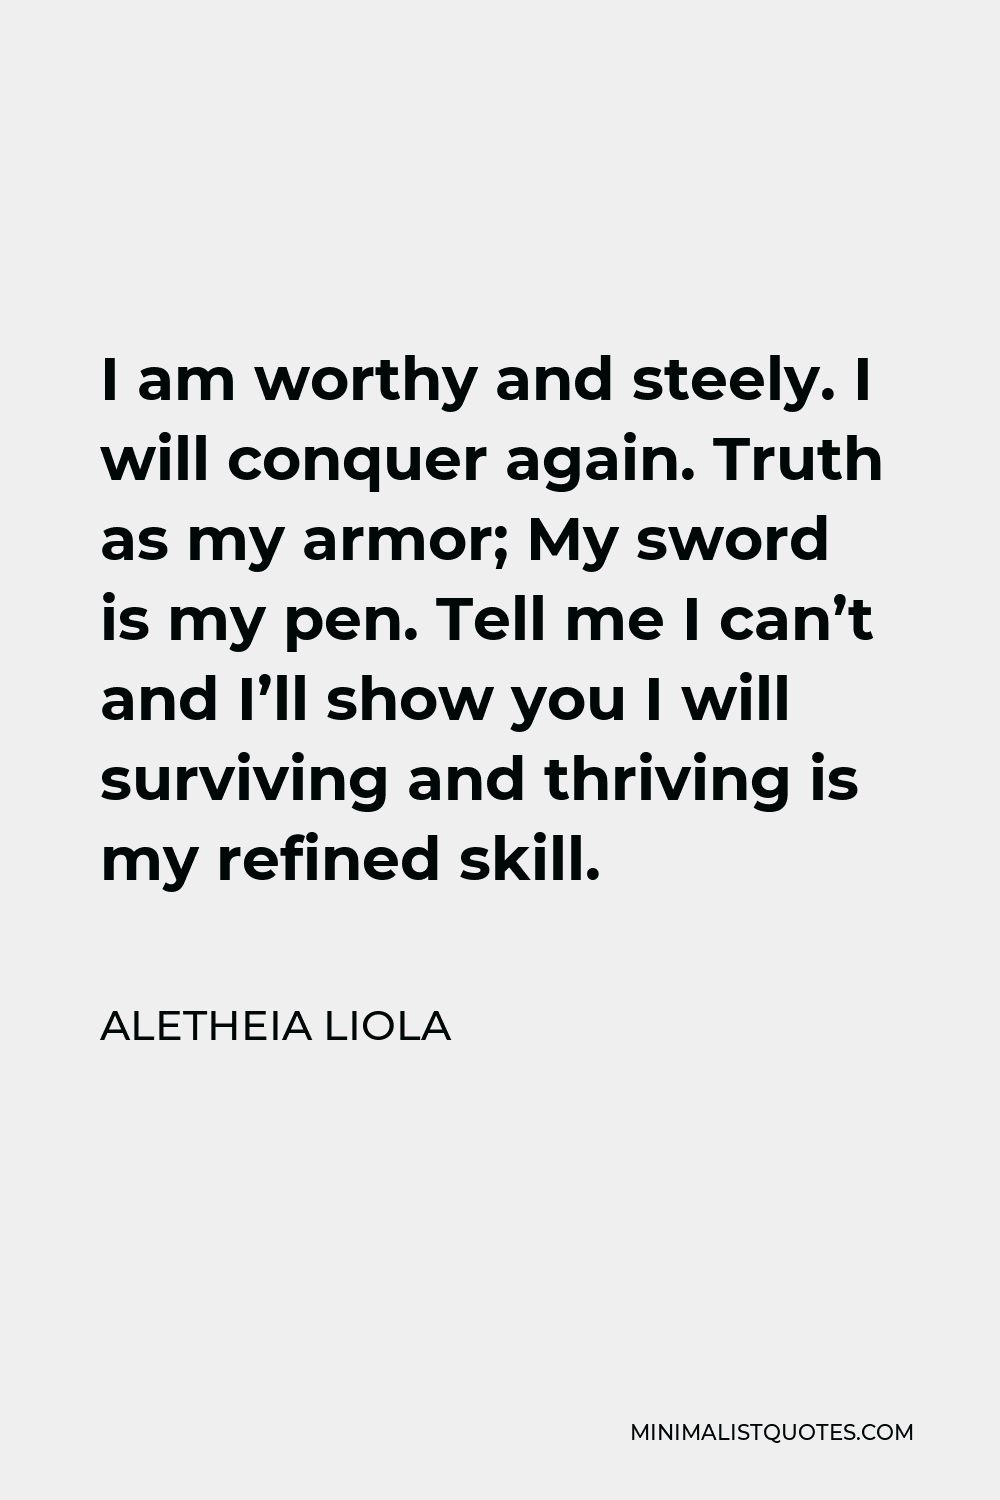 Aletheia Liola Quote - I am worthy and steely. I will conquer again. Truth as my armor; My sword is my pen. Tell me I can’t and I’ll show you I will surviving and thriving is my refined skill.